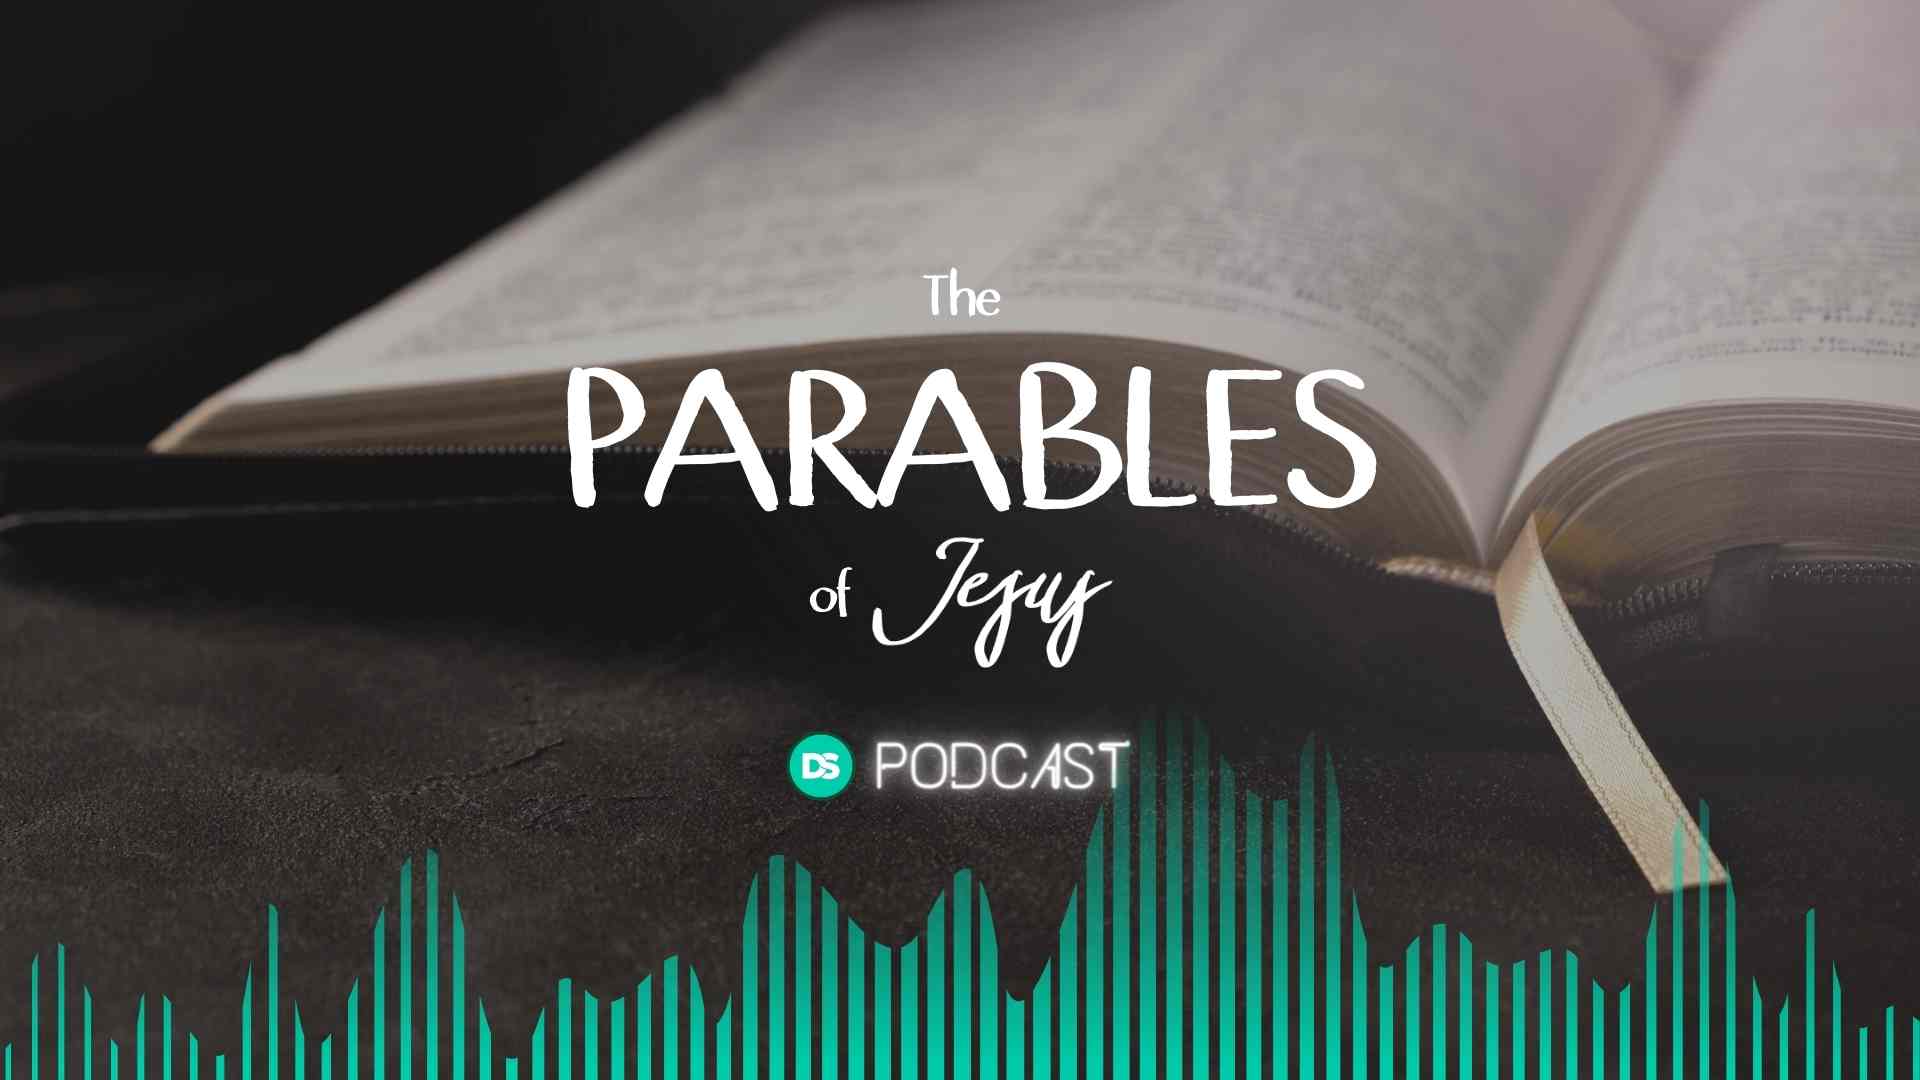 Introducing Our New Series on the Parables of Jesus 10